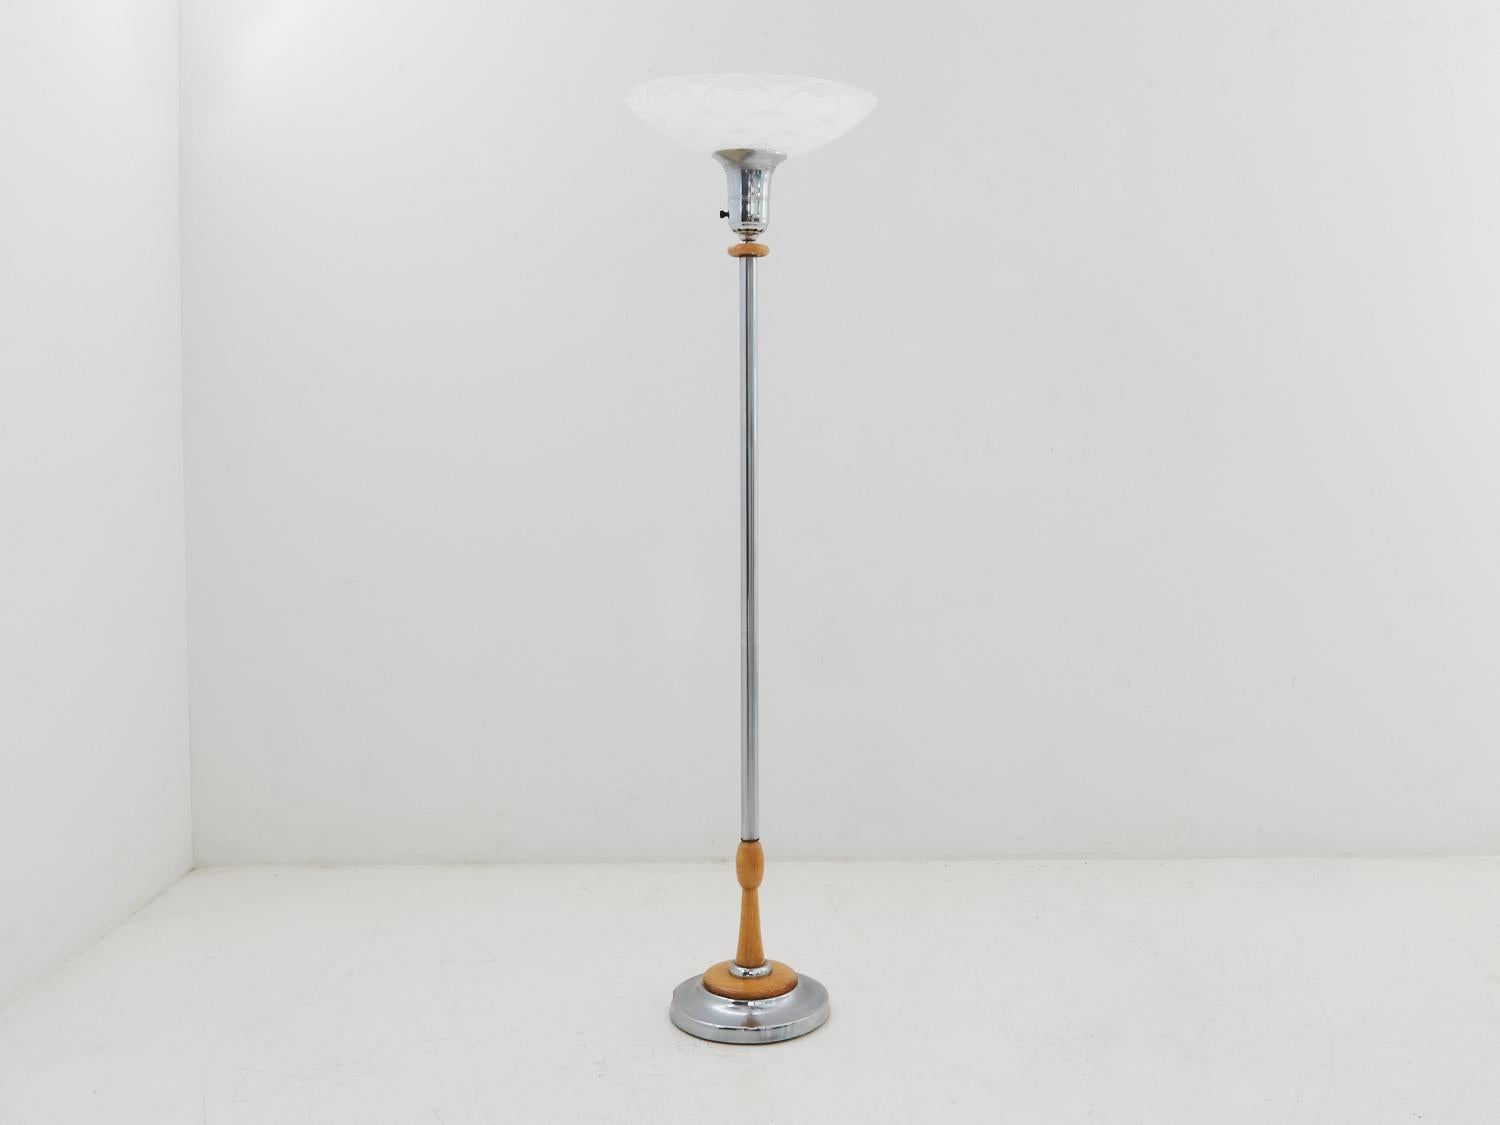 Hold onto your hats, folks, because this art deco torchiere lamp from the '40s is here to bring the sophistication and swankiness to your space. With its iconic design and timeless appeal, it's like having a piece of history right in your living